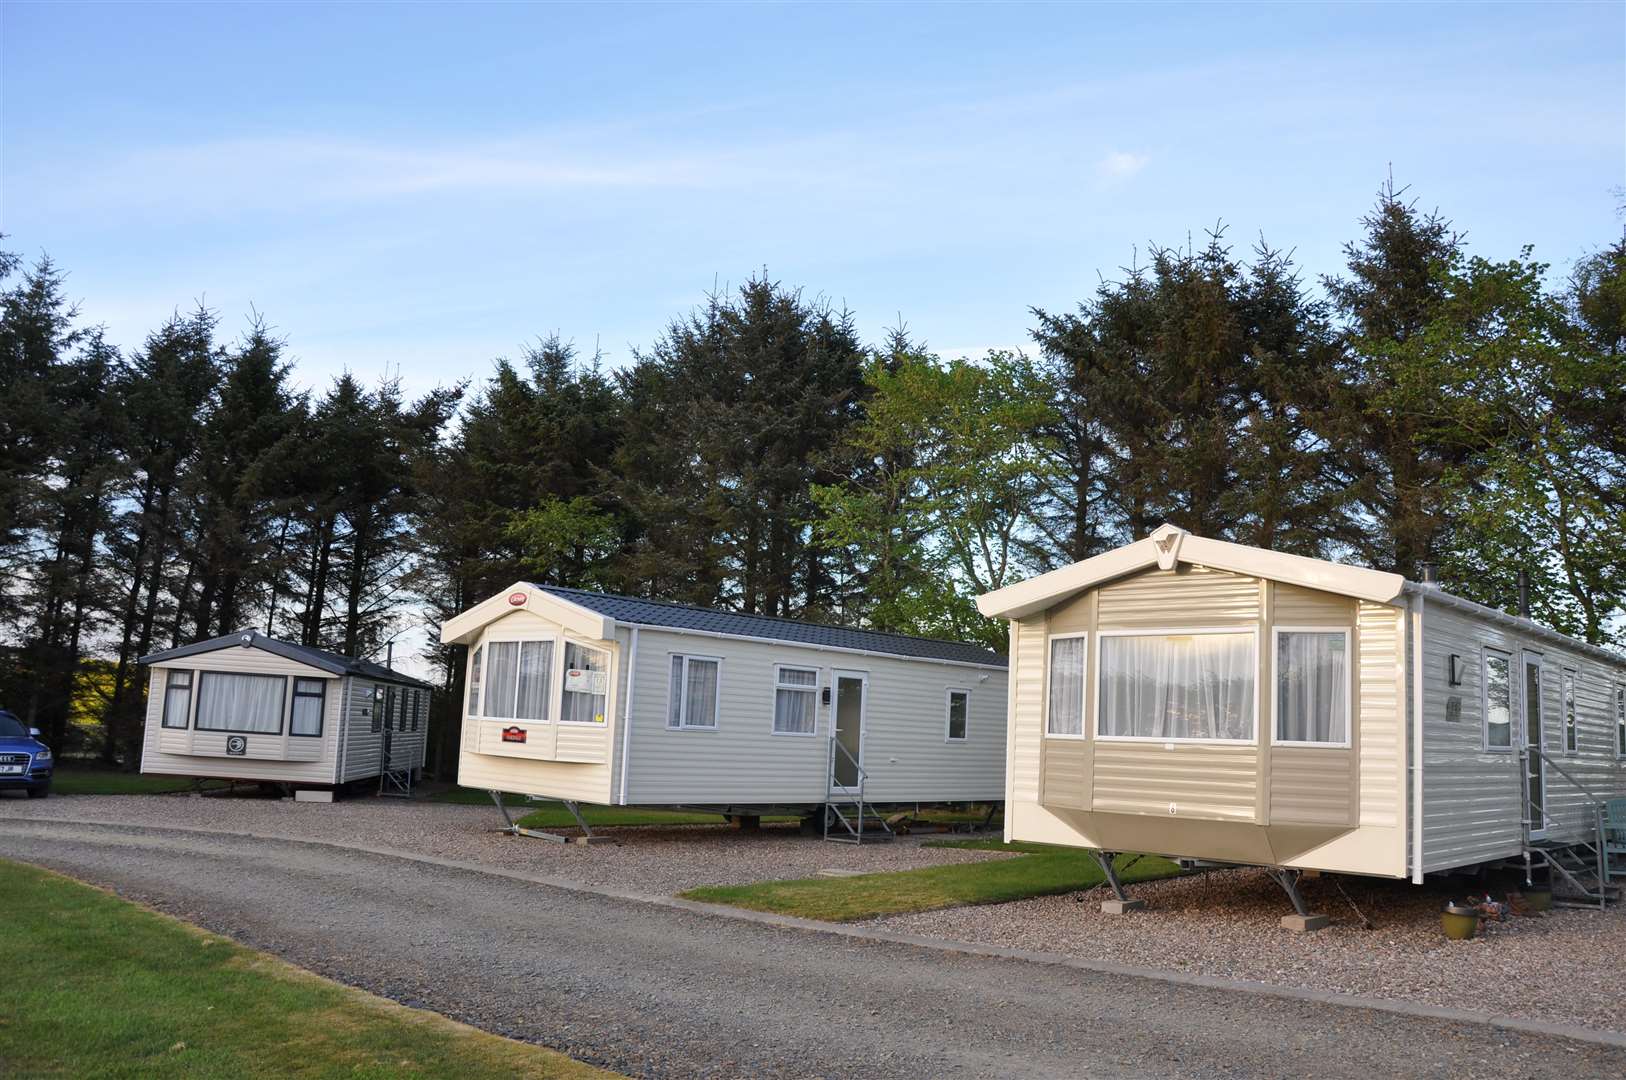 There is help for such as caravan park owners.